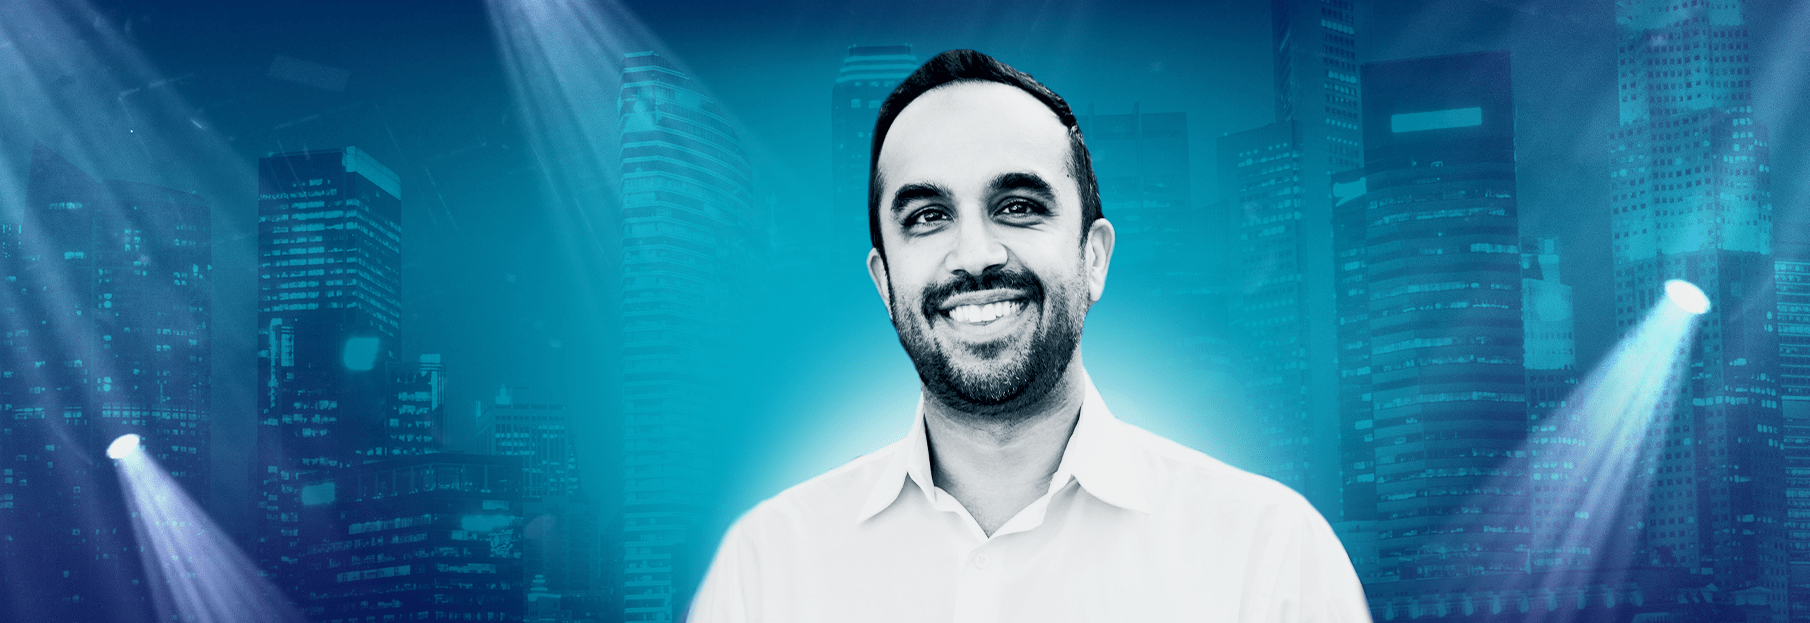 BRAND MINDS 2020 speaker: Neil Pasricha, Bestselling Author and Psychology Researcher